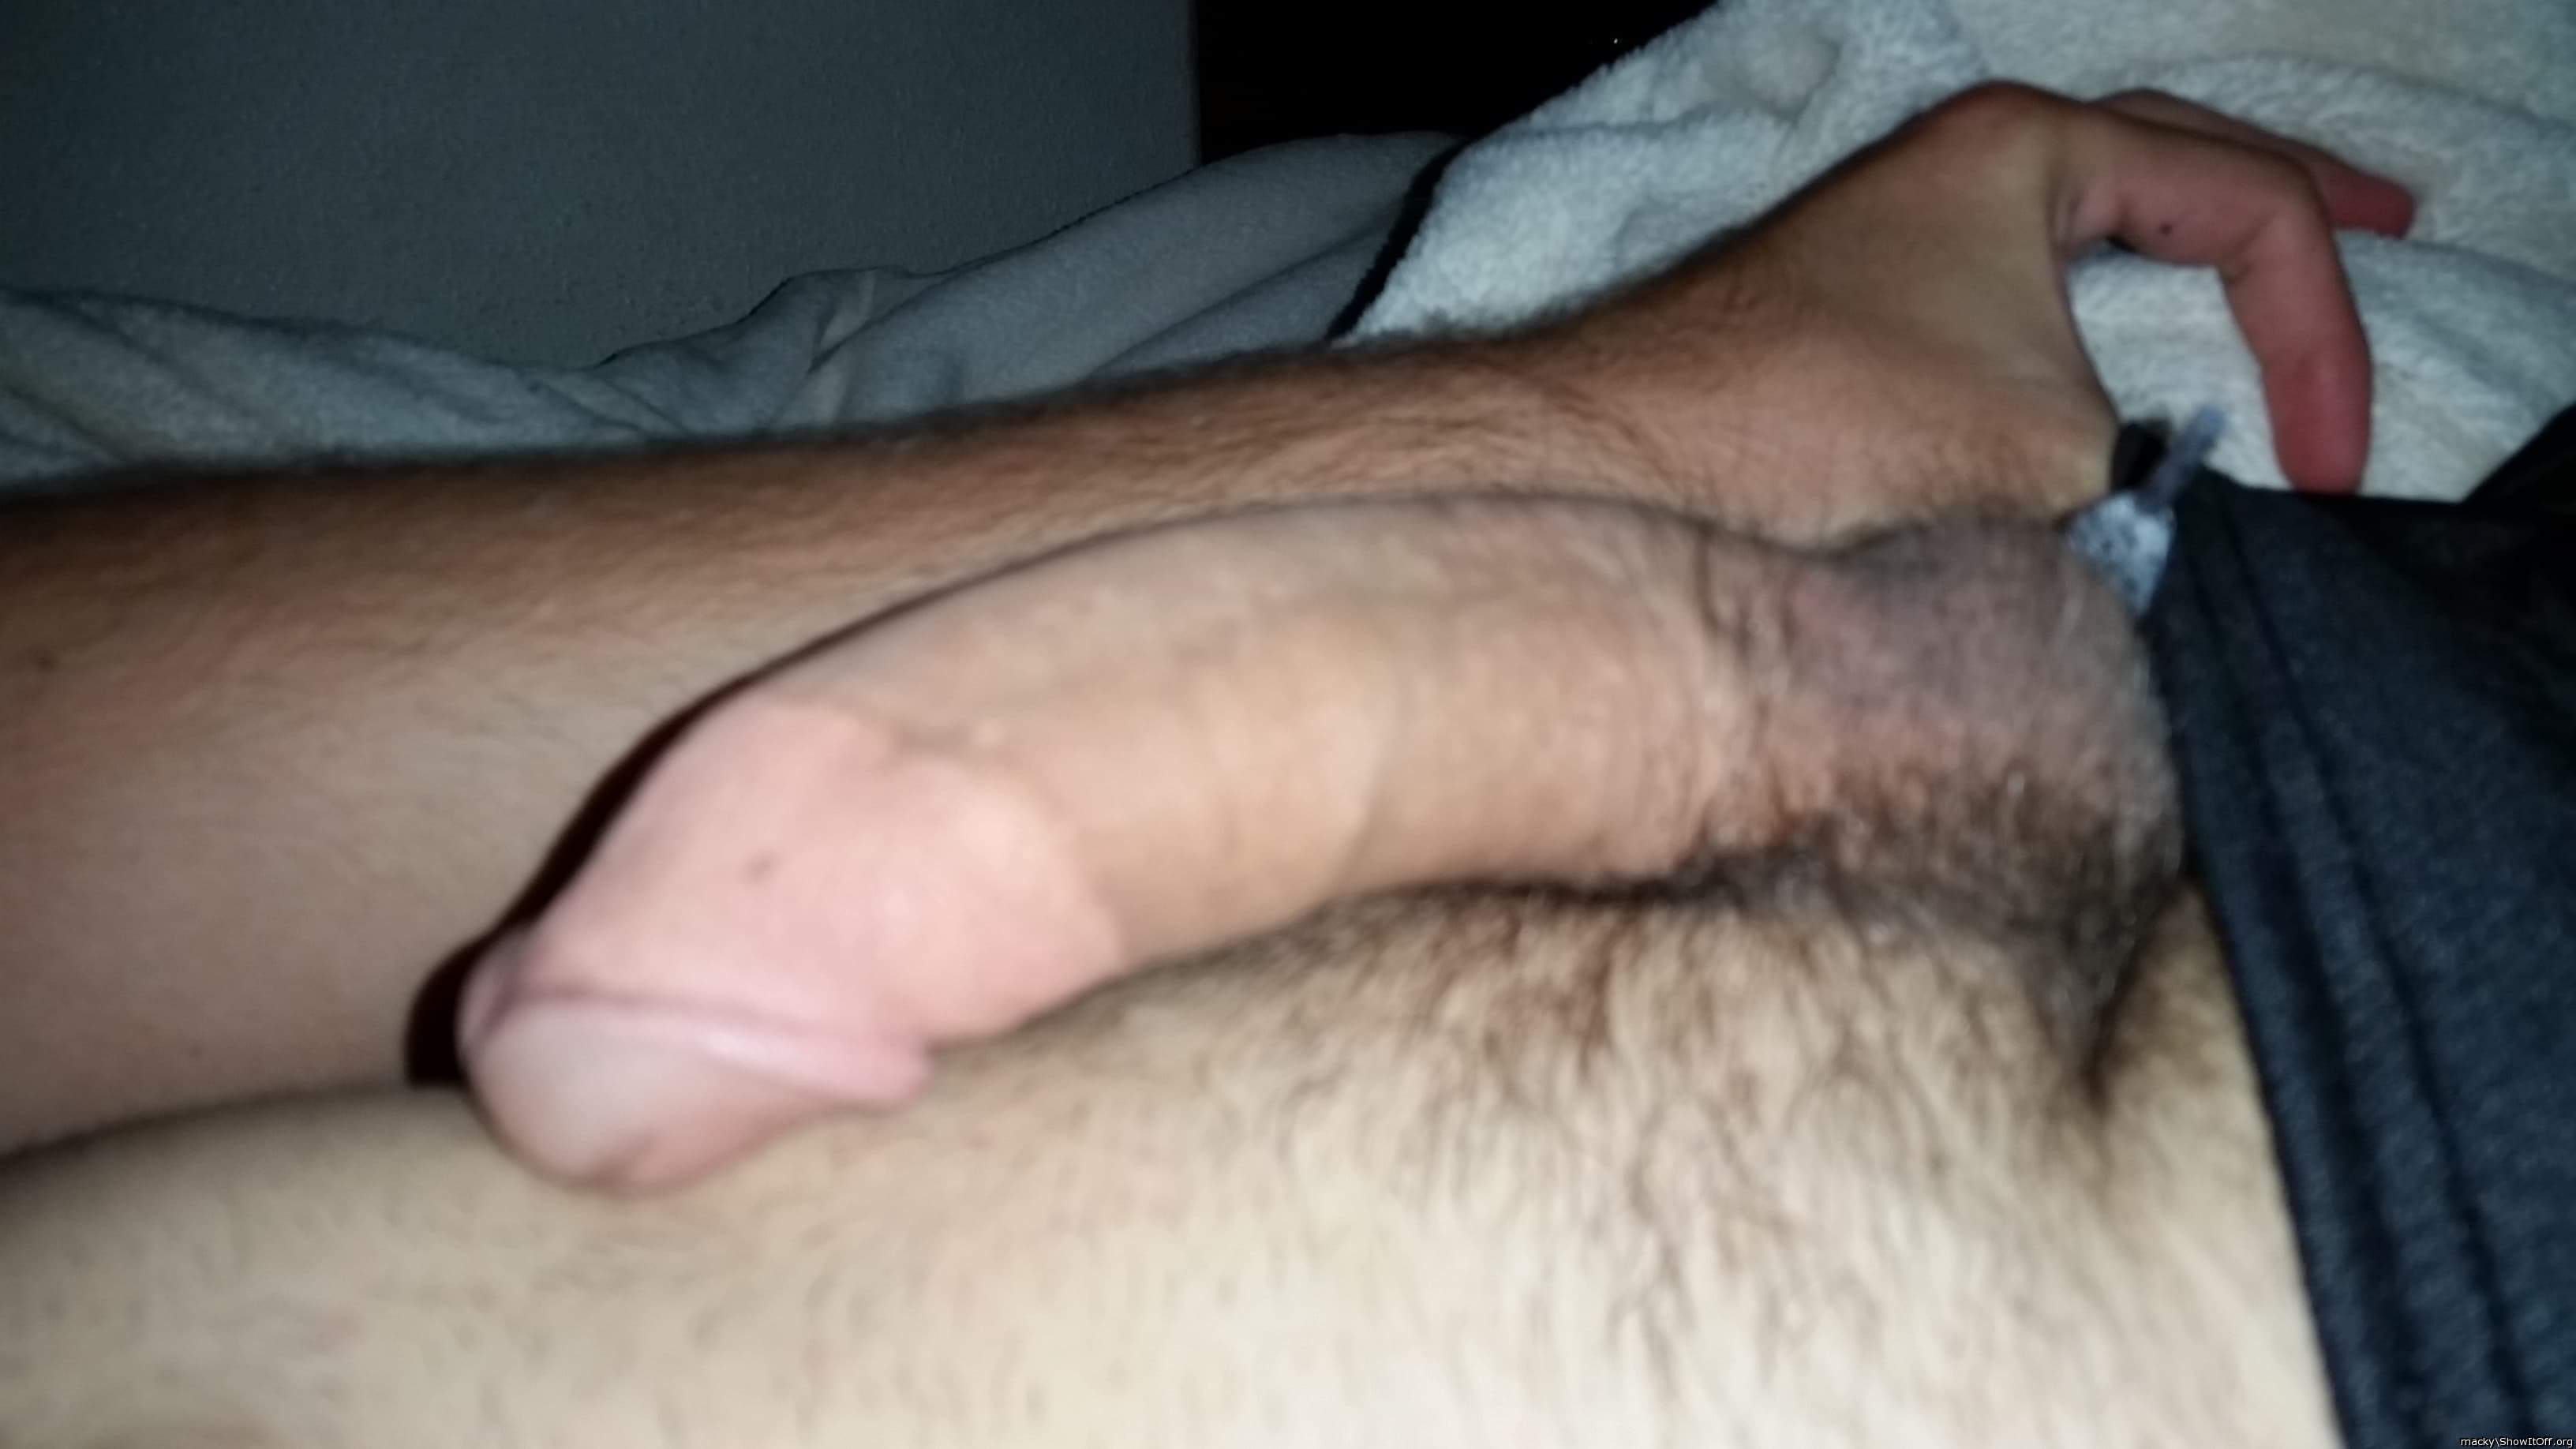 Want someone to suck and ride this dick